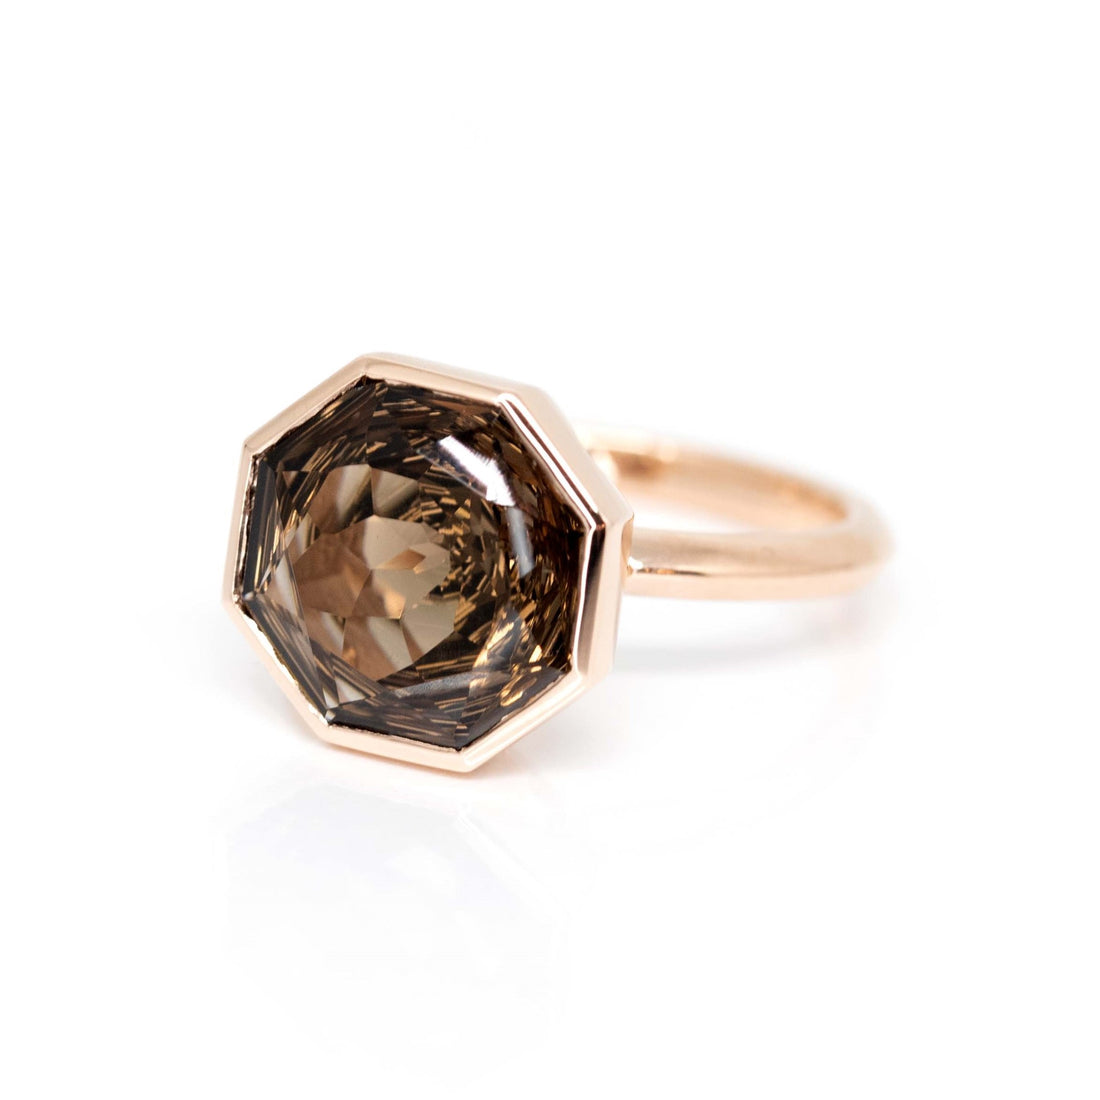 big brown octagon smoky quartz gemstone rose gold ring made by bena jewelry montreal on a white background